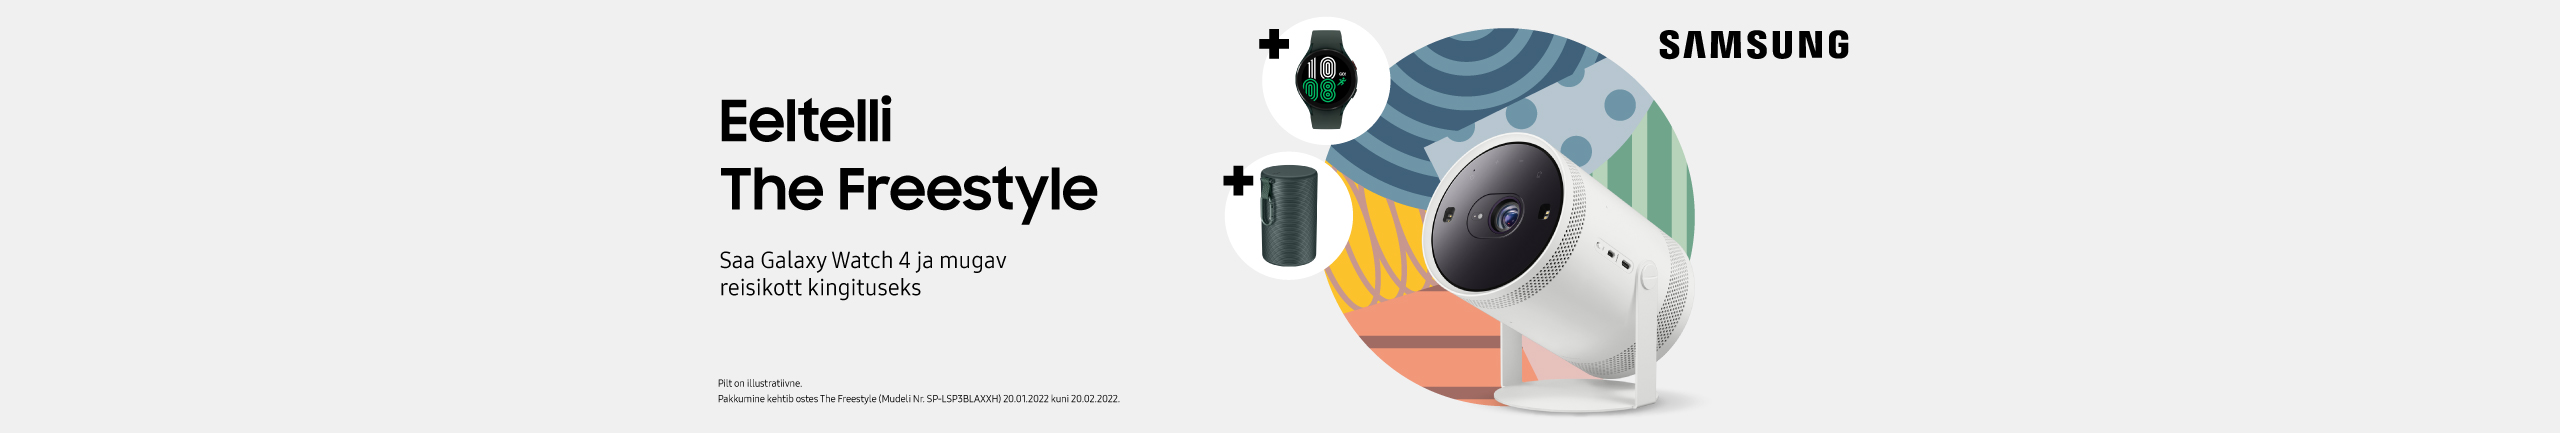 Pre-order Samsung The Freestyle and get Galaxy Watch 4 and travelbag as a complimentary gift!